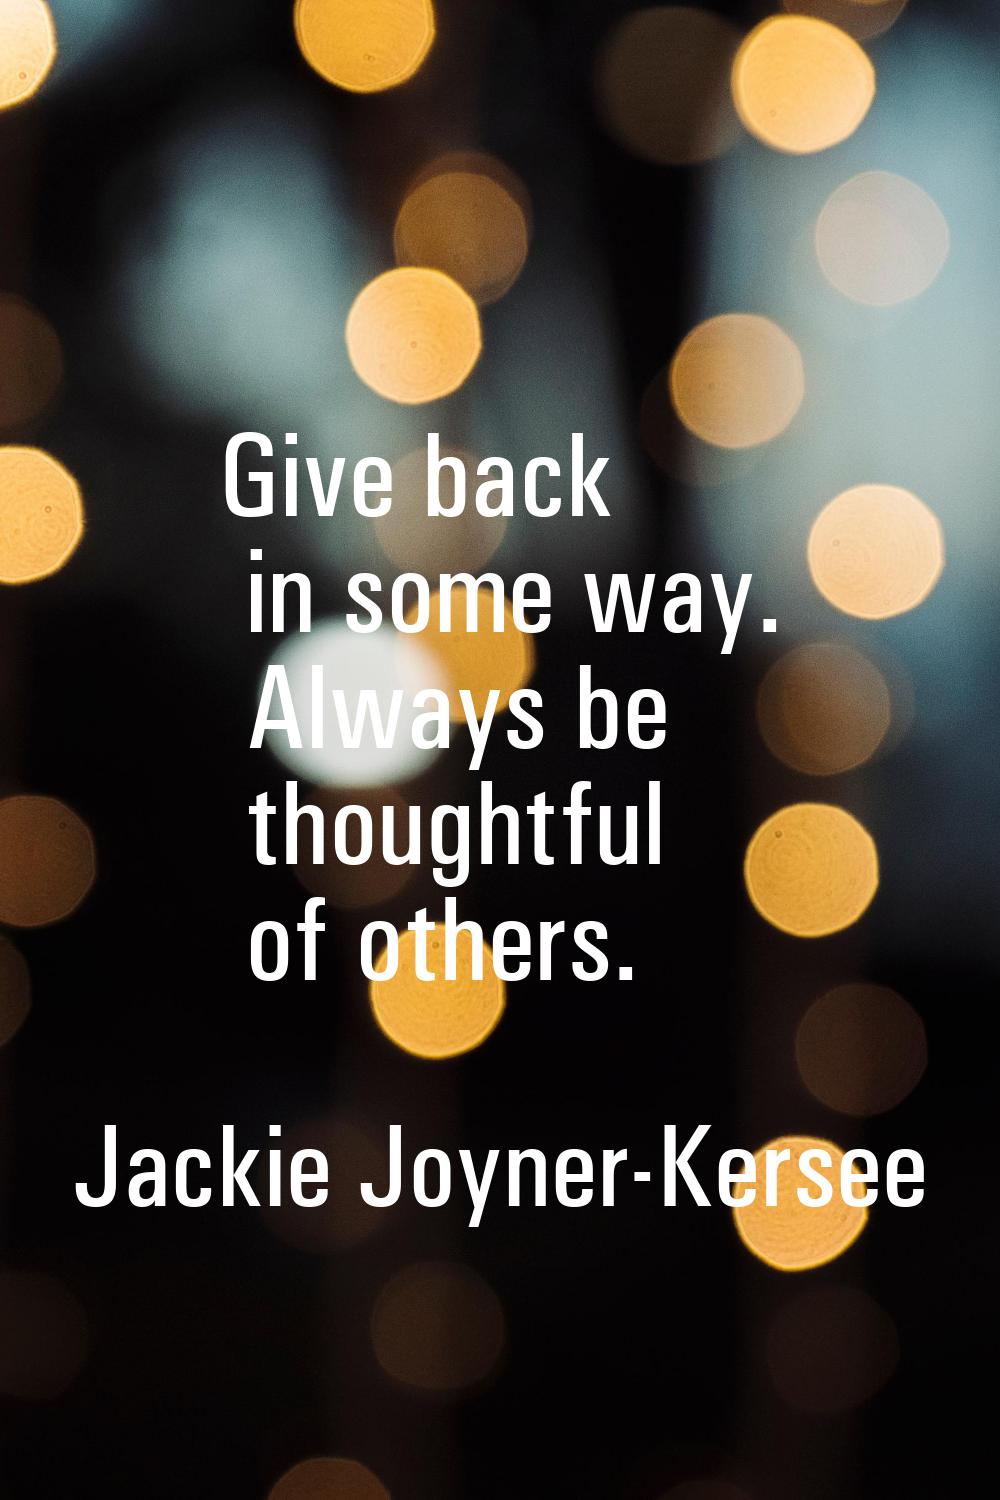 Give back in some way. Always be thoughtful of others.